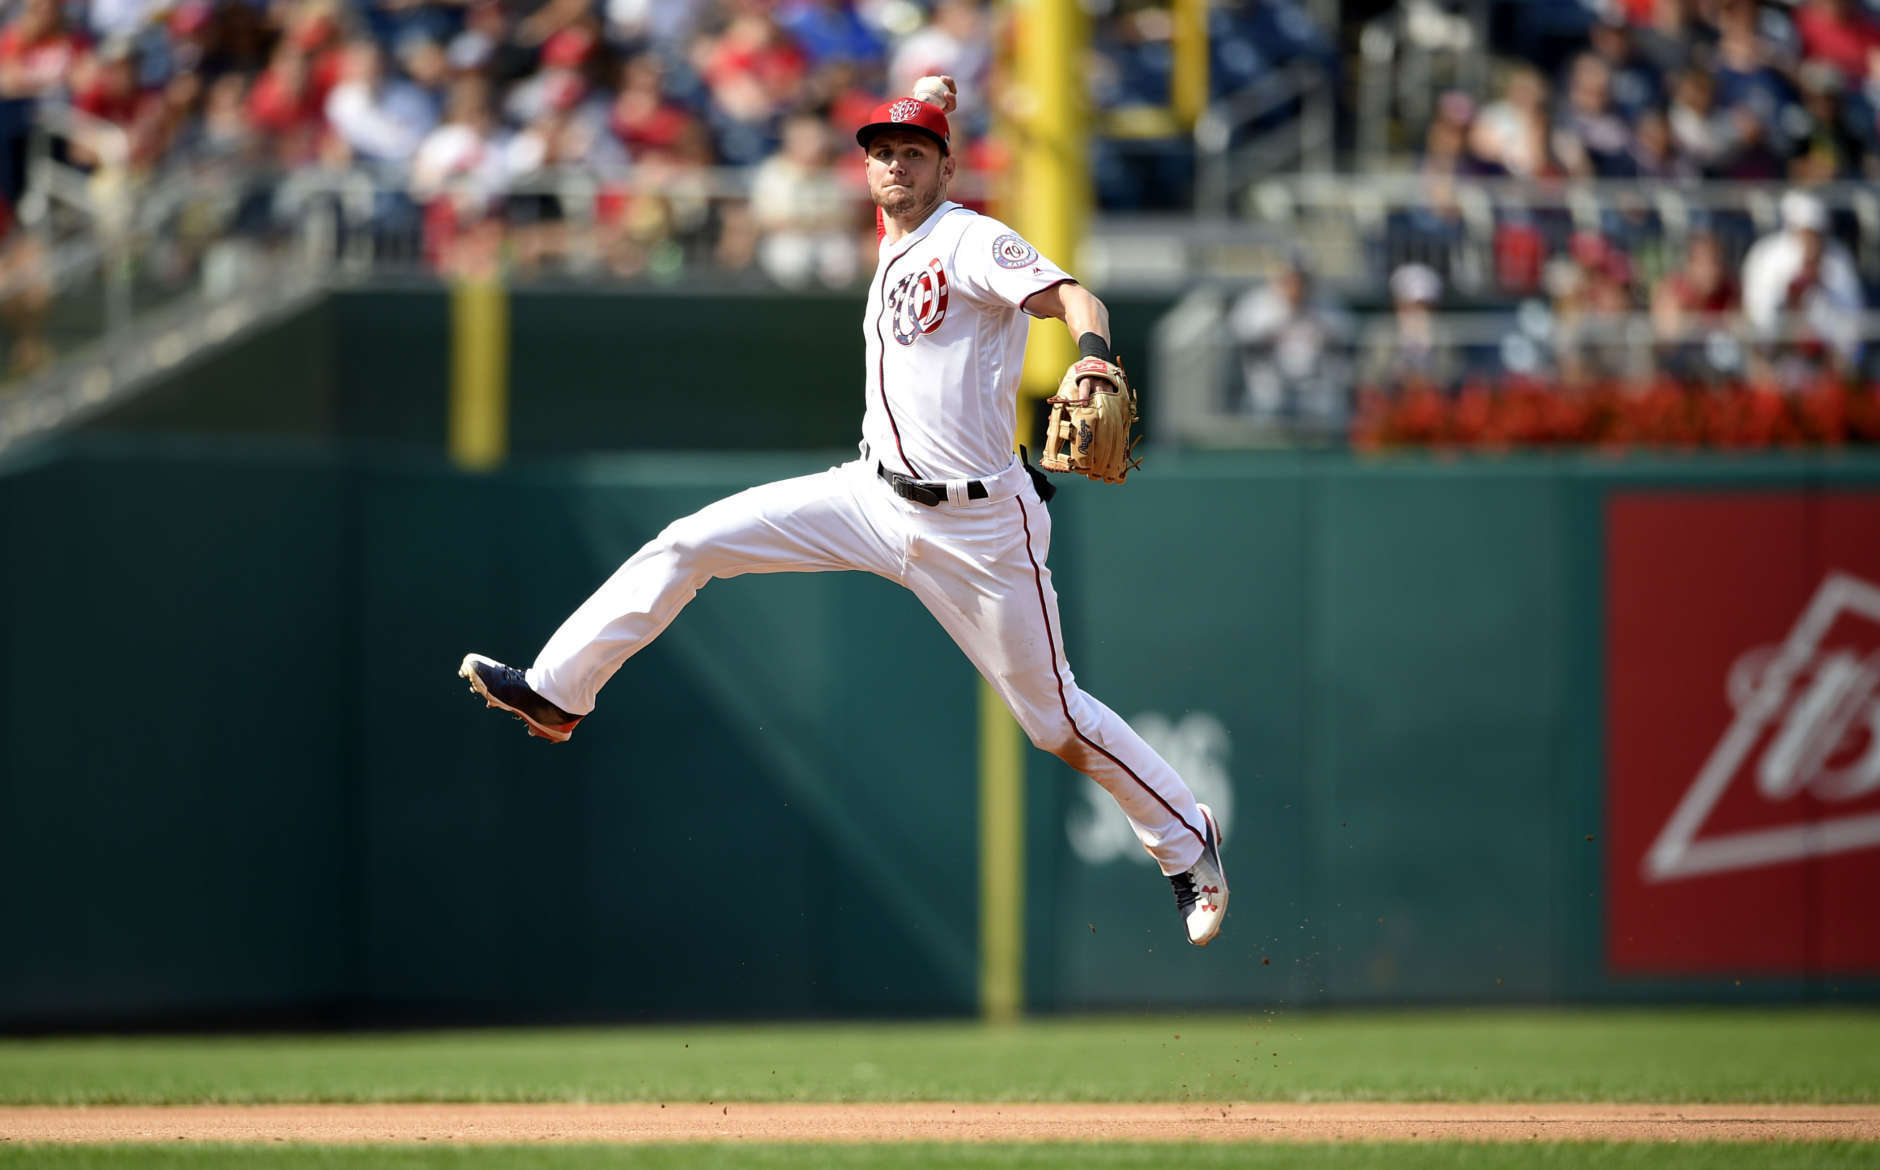 Washington Nationals shortstop Trea Turner leaps up to throw to first to get out Philadelphia Phillies Freddy Galvis during the seventh inning of a baseball game, Sunday, Sept. 10, 2017, in Washington. The Nationals won 3-2. (AP Photo/Nick Wass)